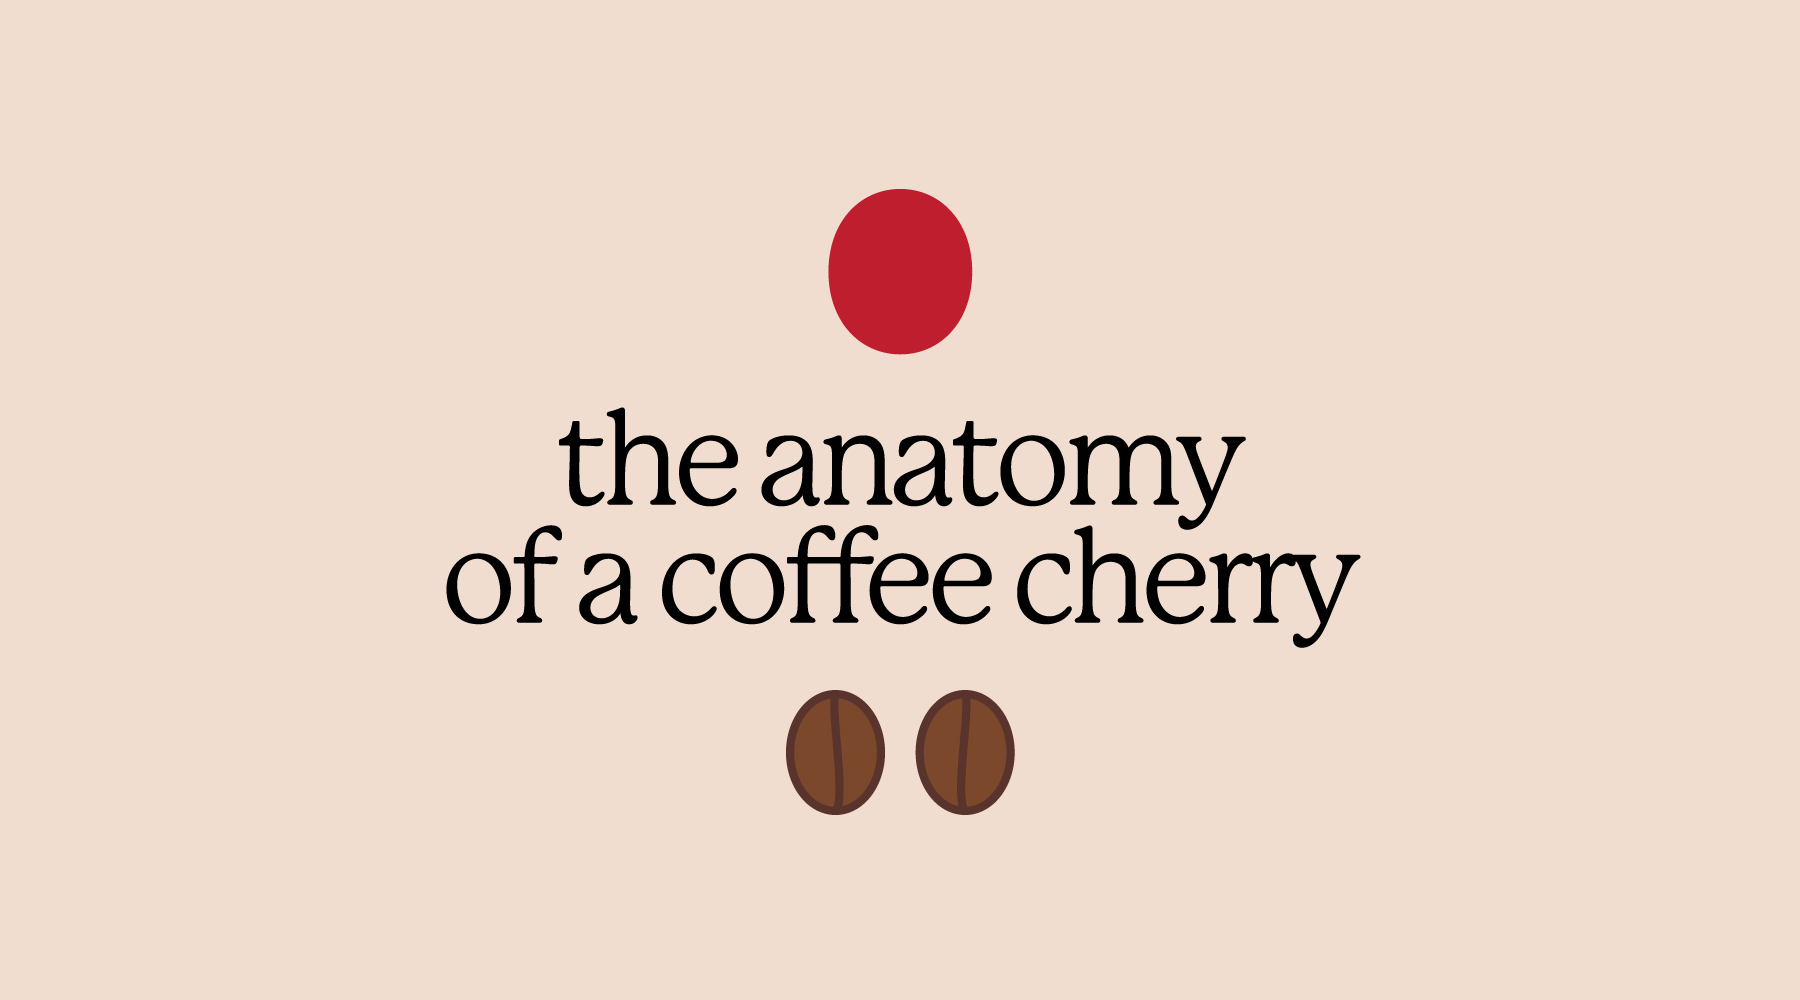 https://cdn.shopify.com/s/files/1/0249/7521/files/anatomy-of-coffee-graphic.png?v=1648275065